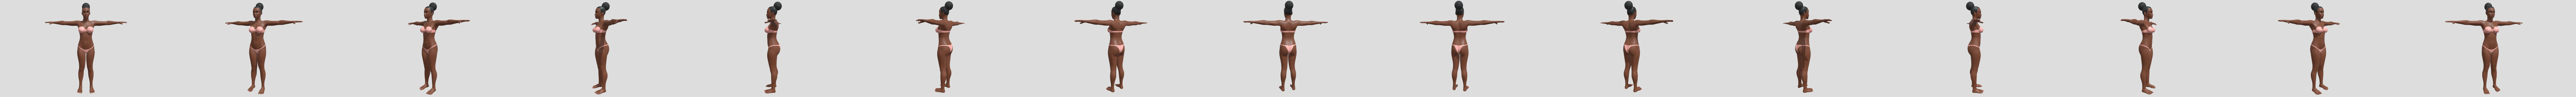 Celine basemesh with 7 1/2 heads proportion - 3D model by Auriston